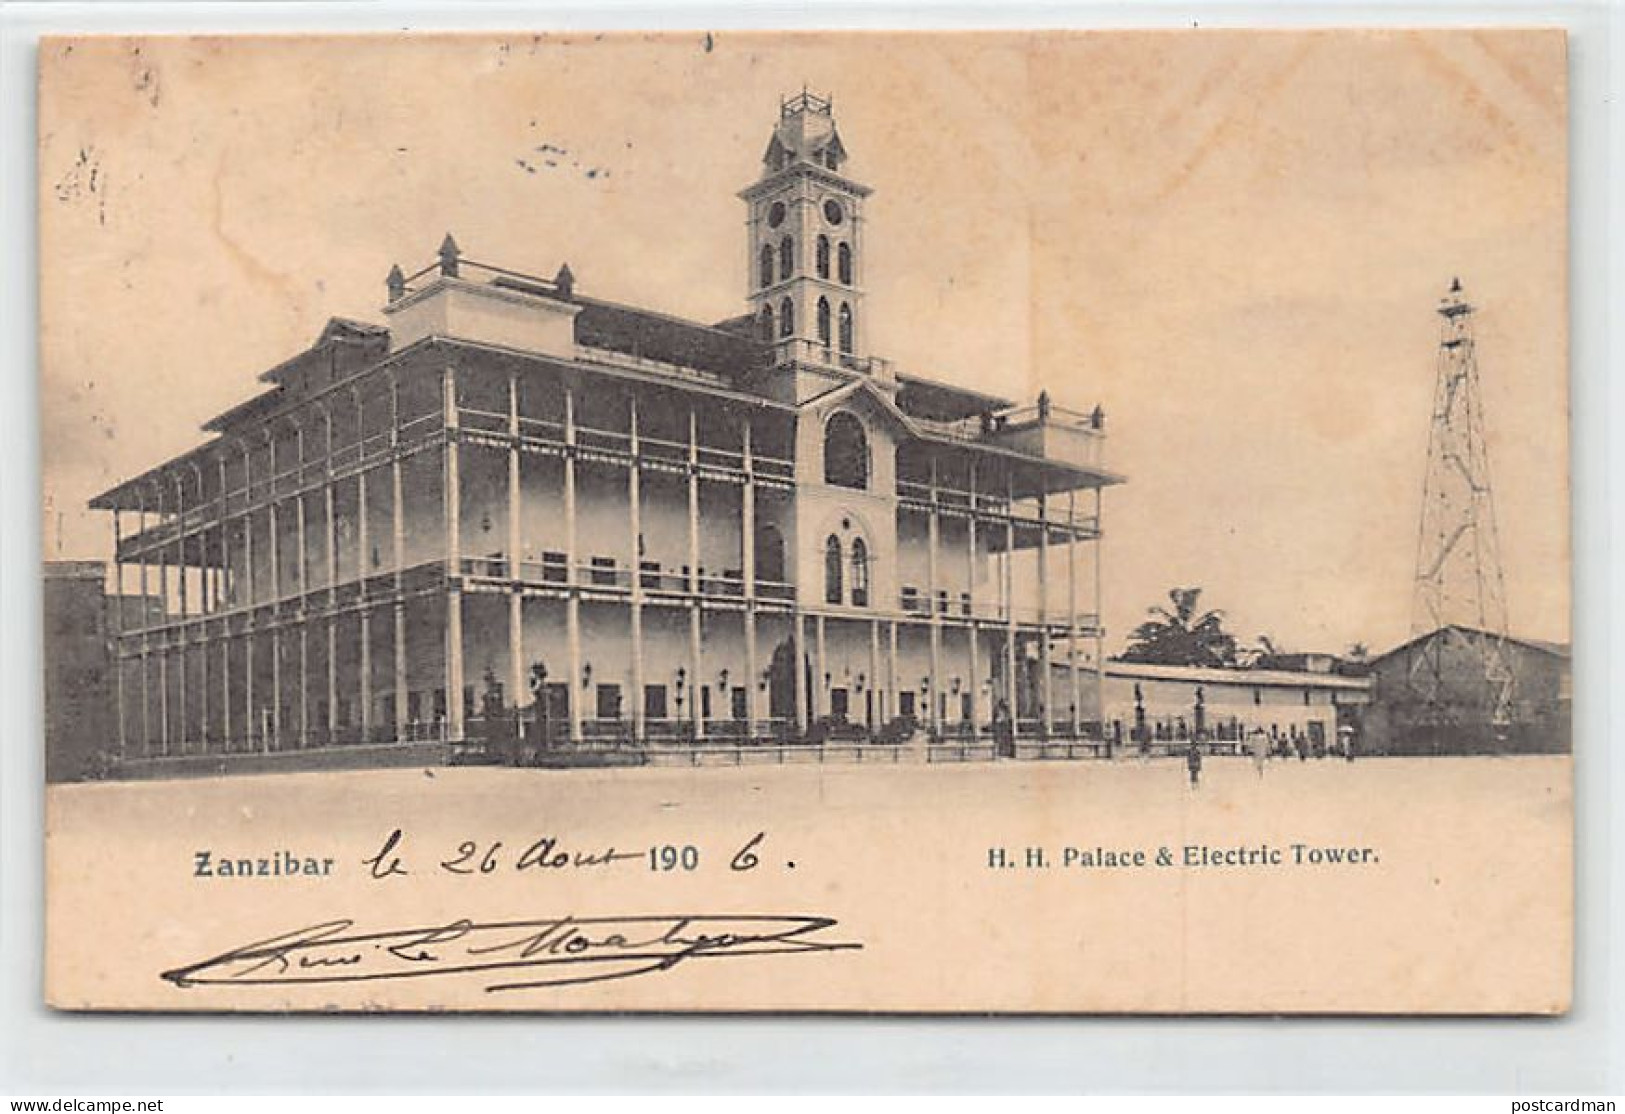 Tanzania - ZANZIBAR - H.H. Palace And Electric Tower - POSTCARD IS UNSTICKED - Publ. Pereira De Lord Brothers  - Tanzania